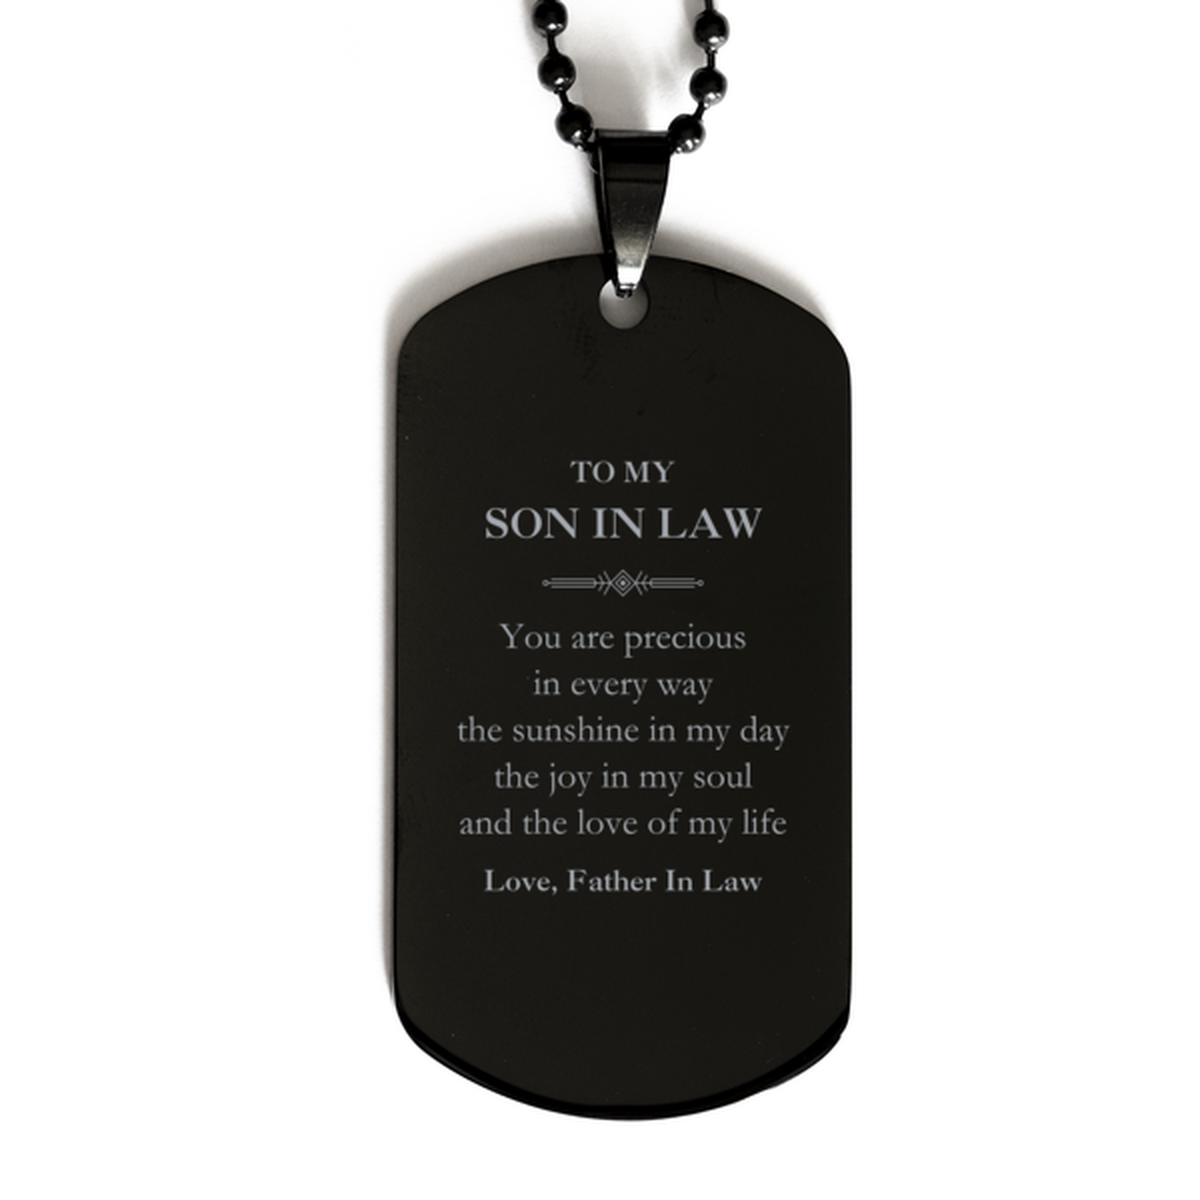 Graduation Gifts for Son In Law Black Dog Tag Present from Father In Law, Christmas Son In Law Birthday Gifts Son In Law You are precious in every way the sunshine in my day. Love, Father In Law